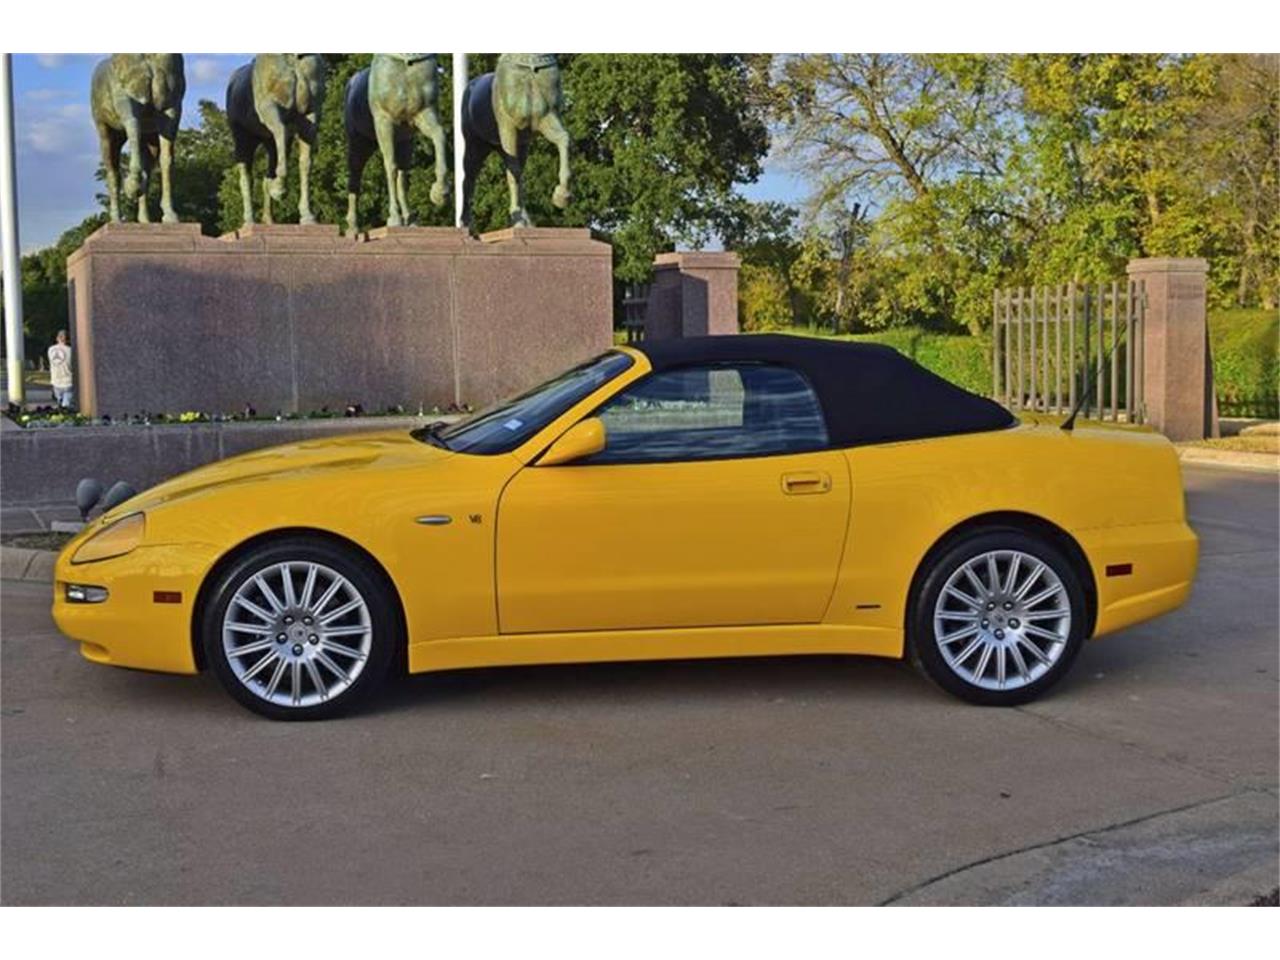 2002 Maserati Spyder for sale in Fort Worth, TX ...